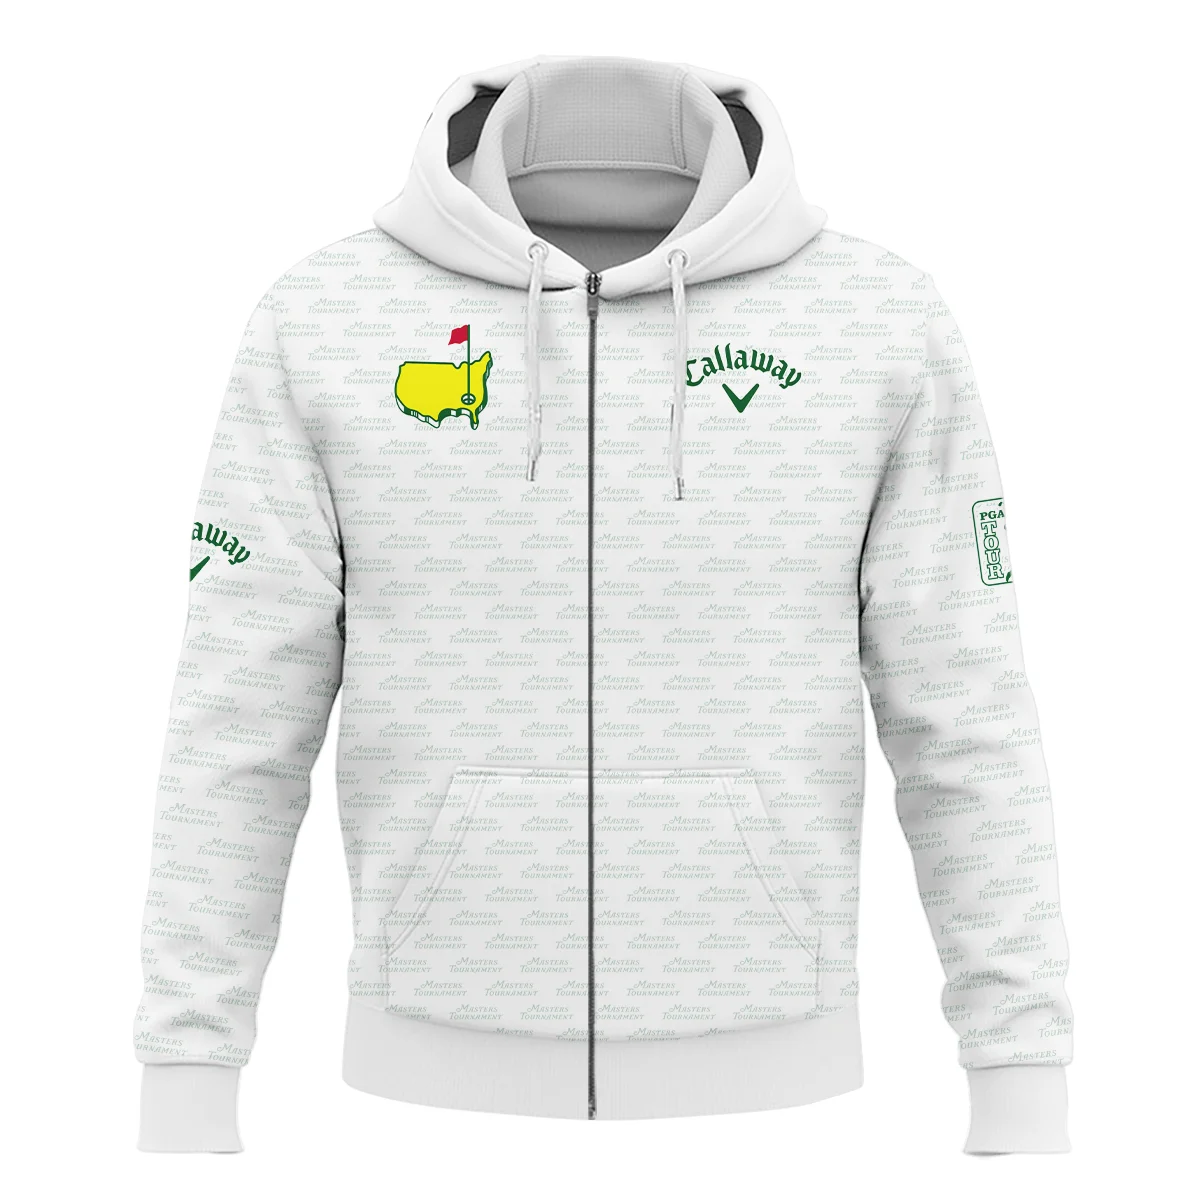 Masters Tournament Golf Callaway Bomber Jacket Logo Text Pattern White Green Golf Sports All Over Print Bomber Jacket